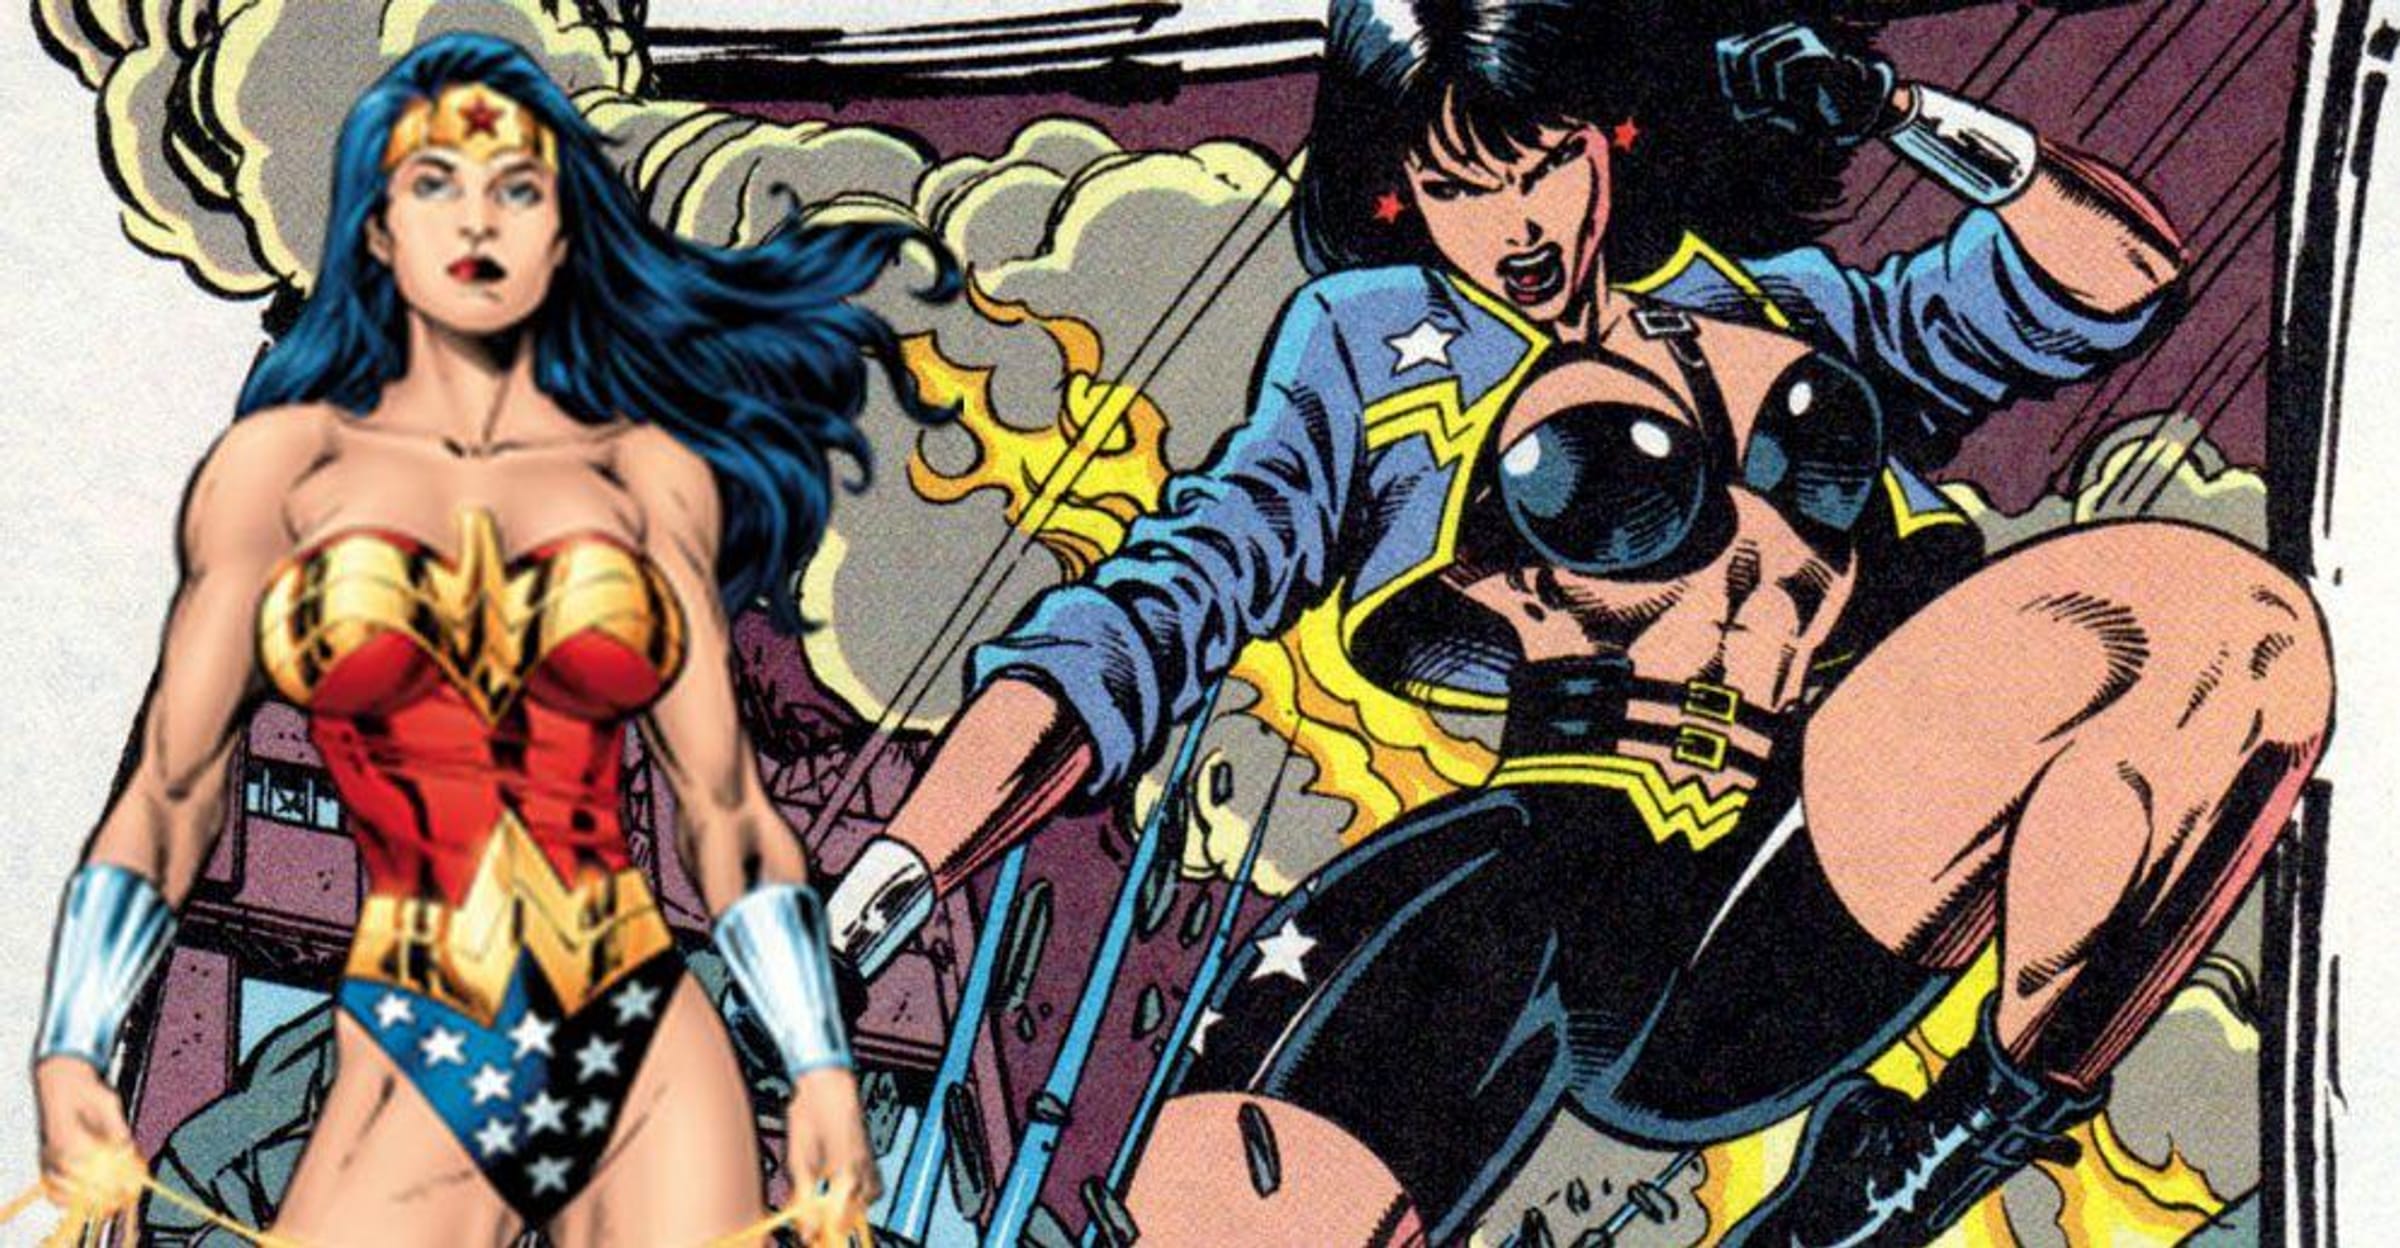 14 Wonder Woman Costumes From The Comics, Ranked By Practicality